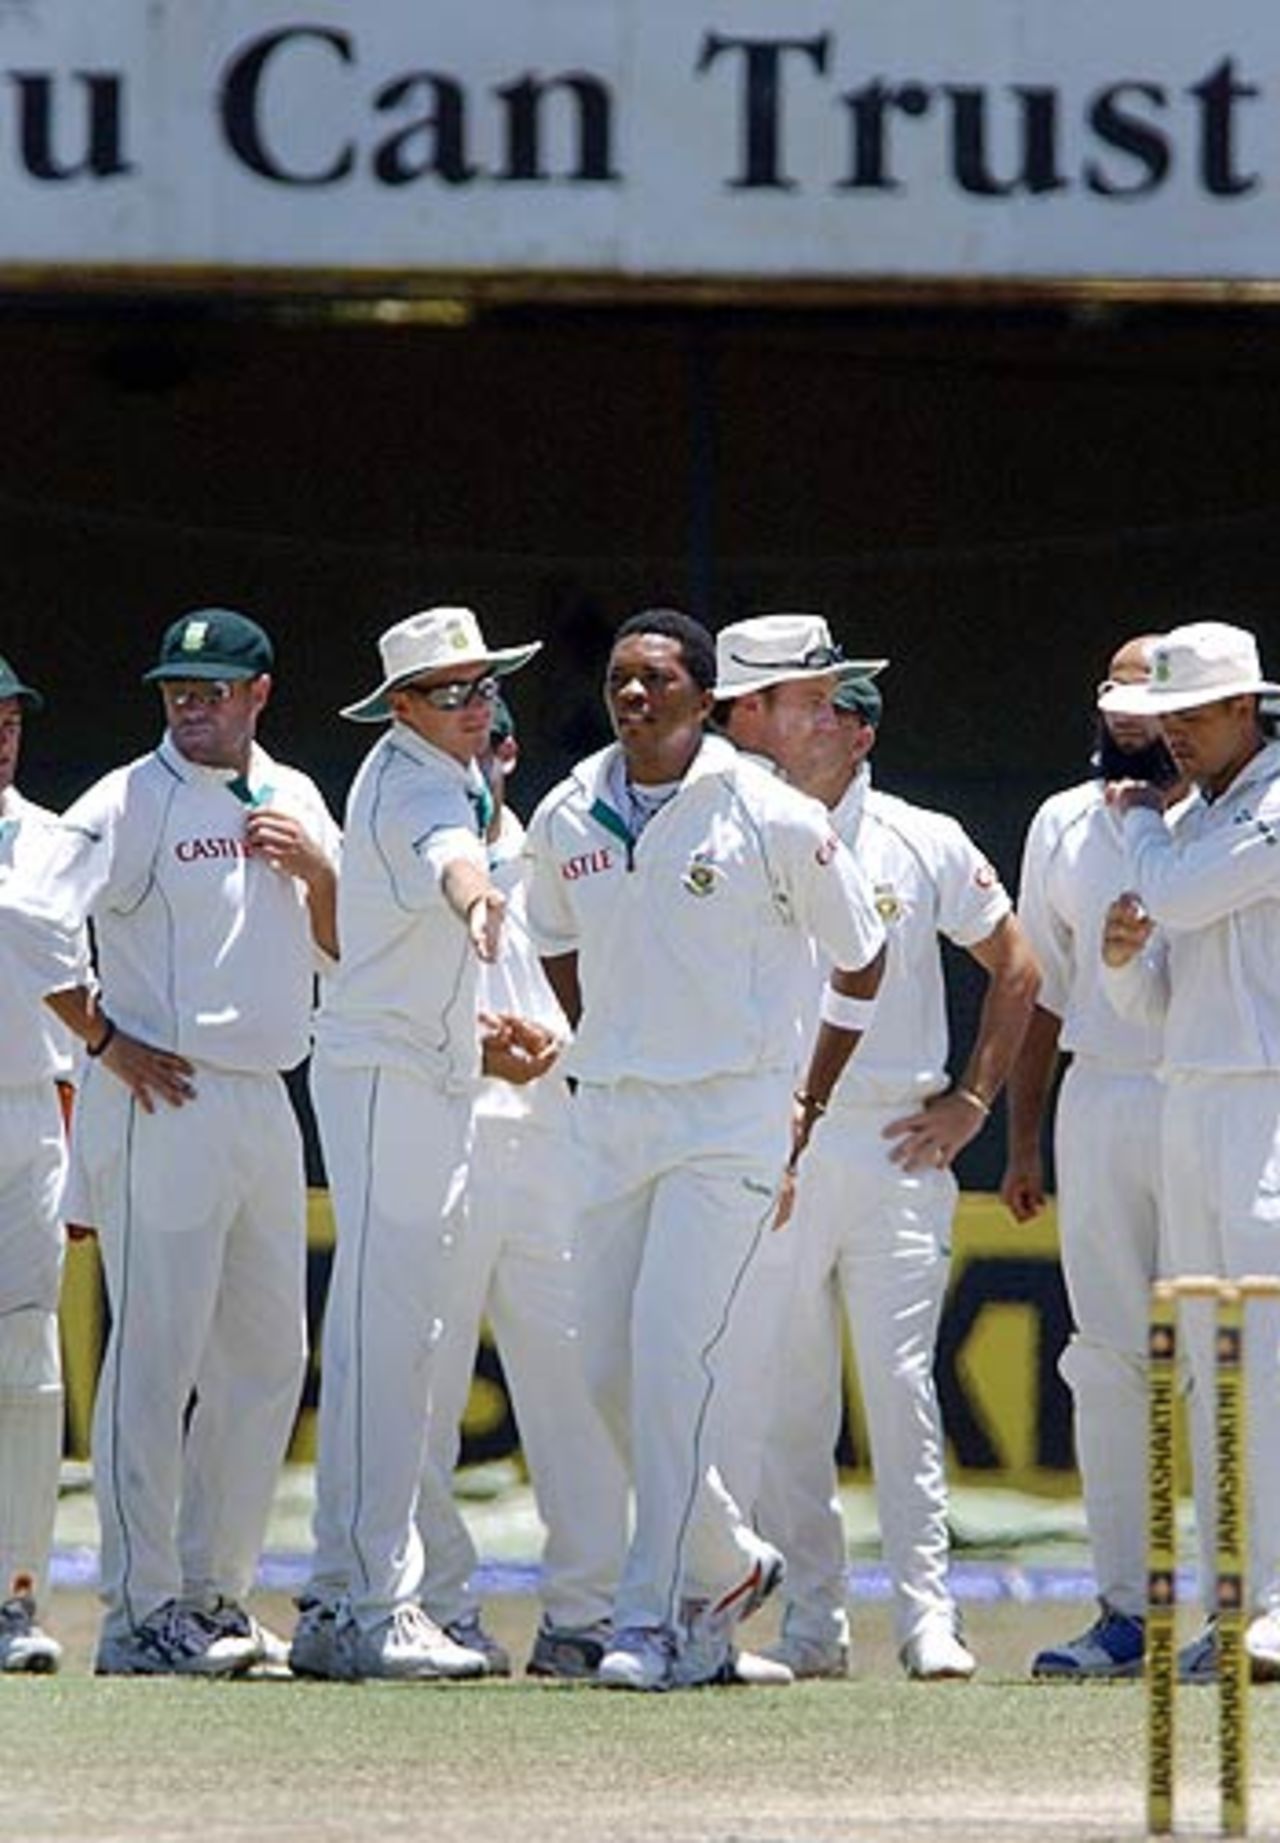 The South Africans congratulate Makhaya Ntini after Upul Tharanga's wicket, Sri Lanka v South Africa, 2nd Test, Colombo, 4th day, August 7, 2006